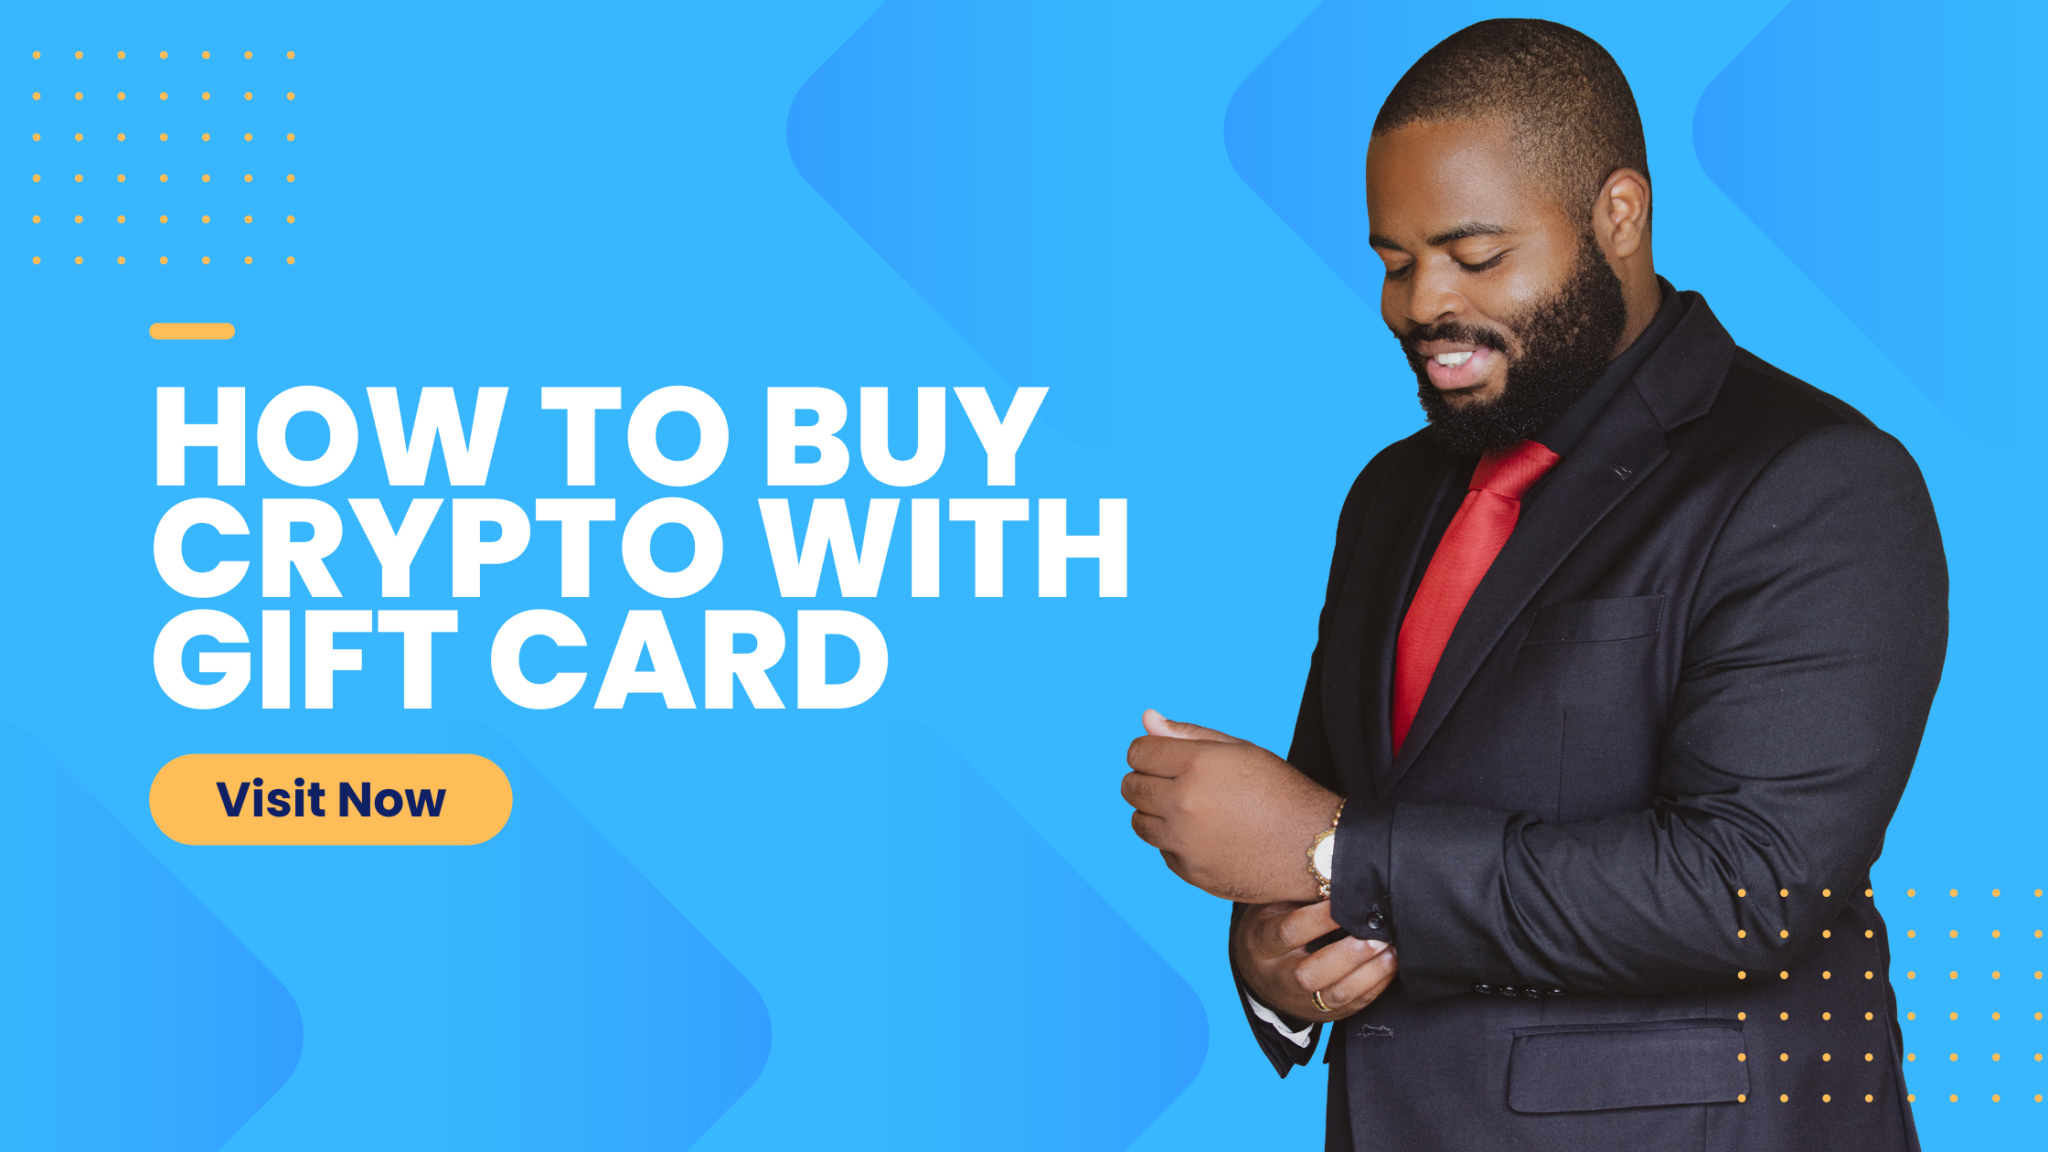 How to Buy Crypto with Gift Card